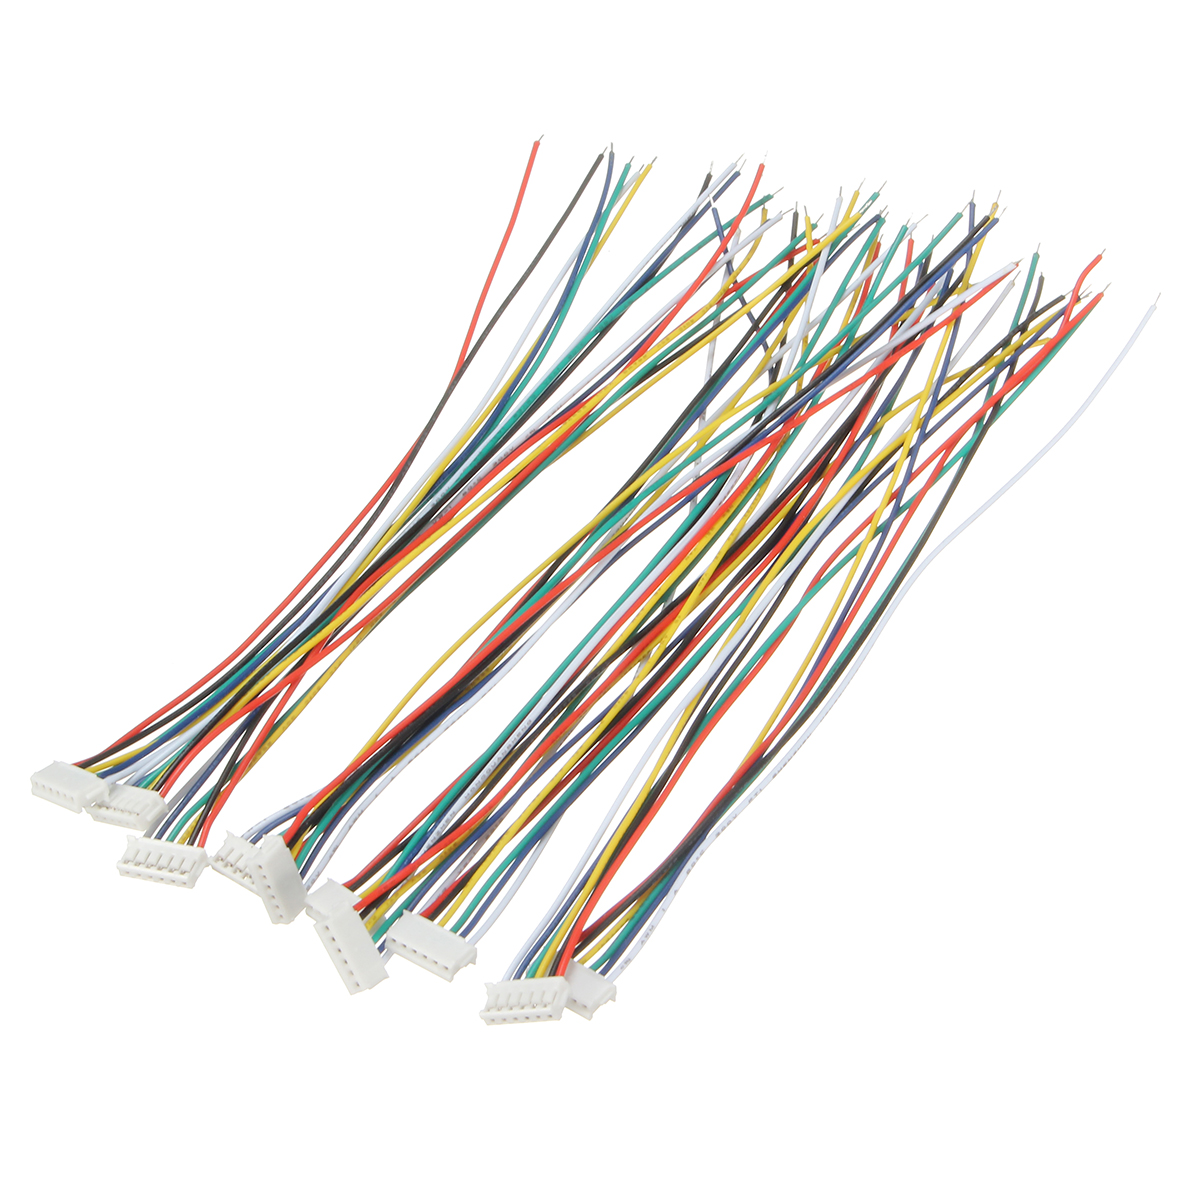 Excellwayreg-Mini-Micro-JST-15mm-ZH-6-Pin-Connector-Plug-and-Wires-Cables-15cm-10-Set-1170230-7